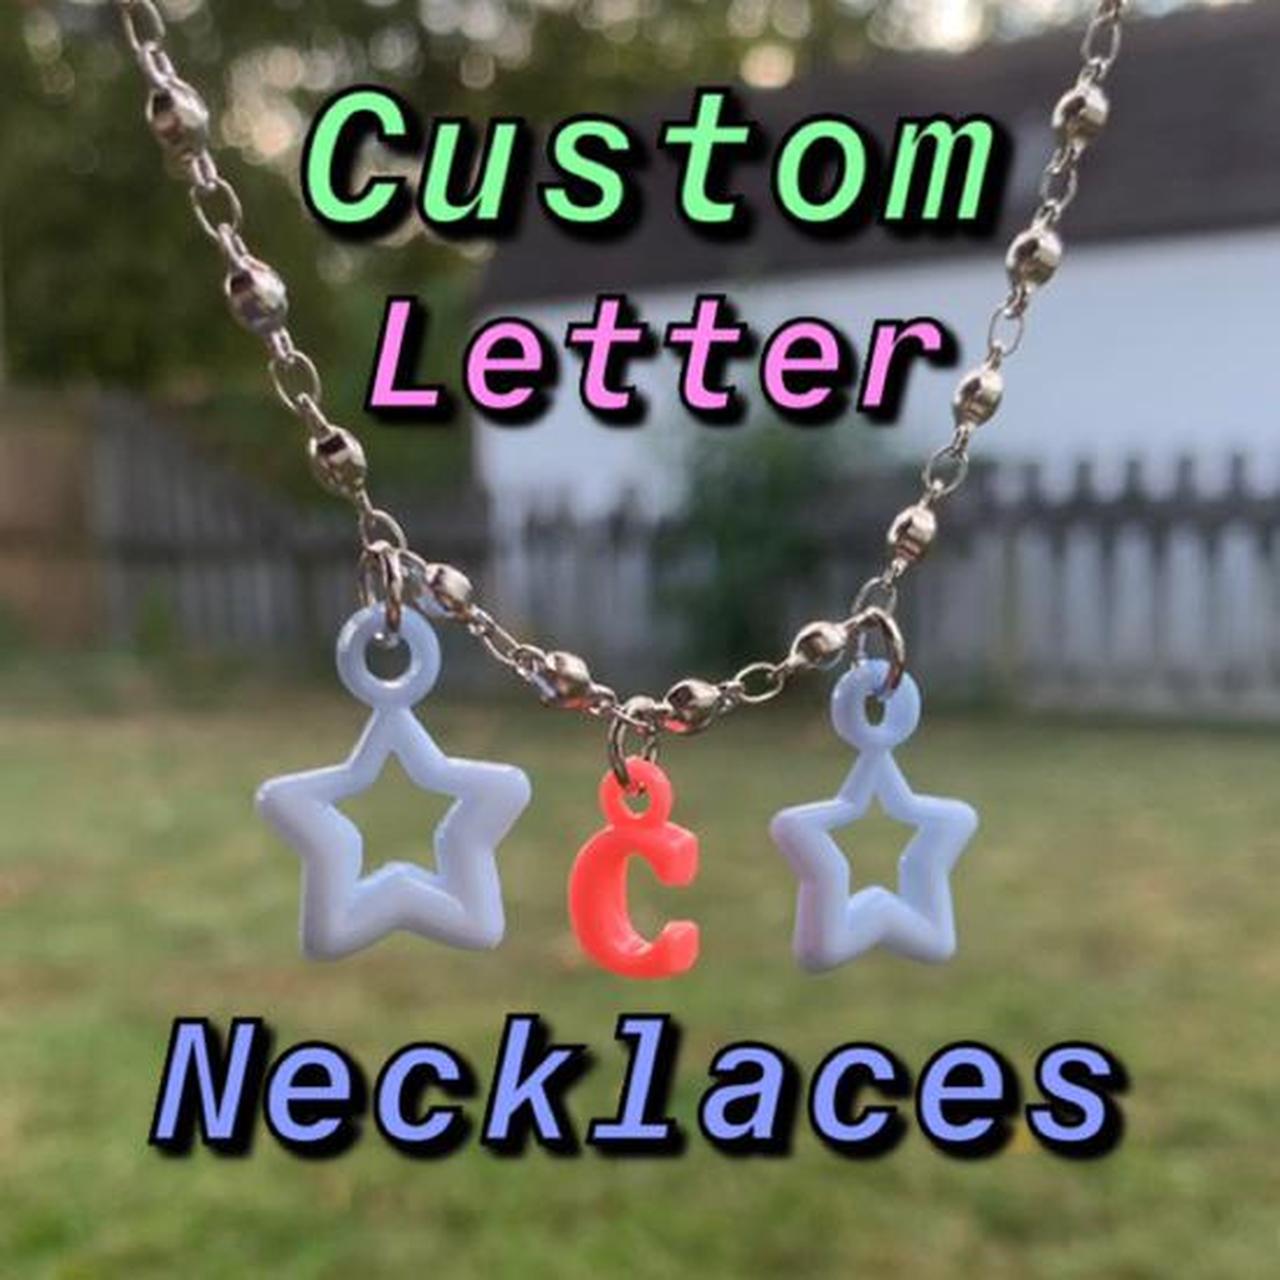 Product Image 1 - Custom letter necklaces! 🦋

Please message